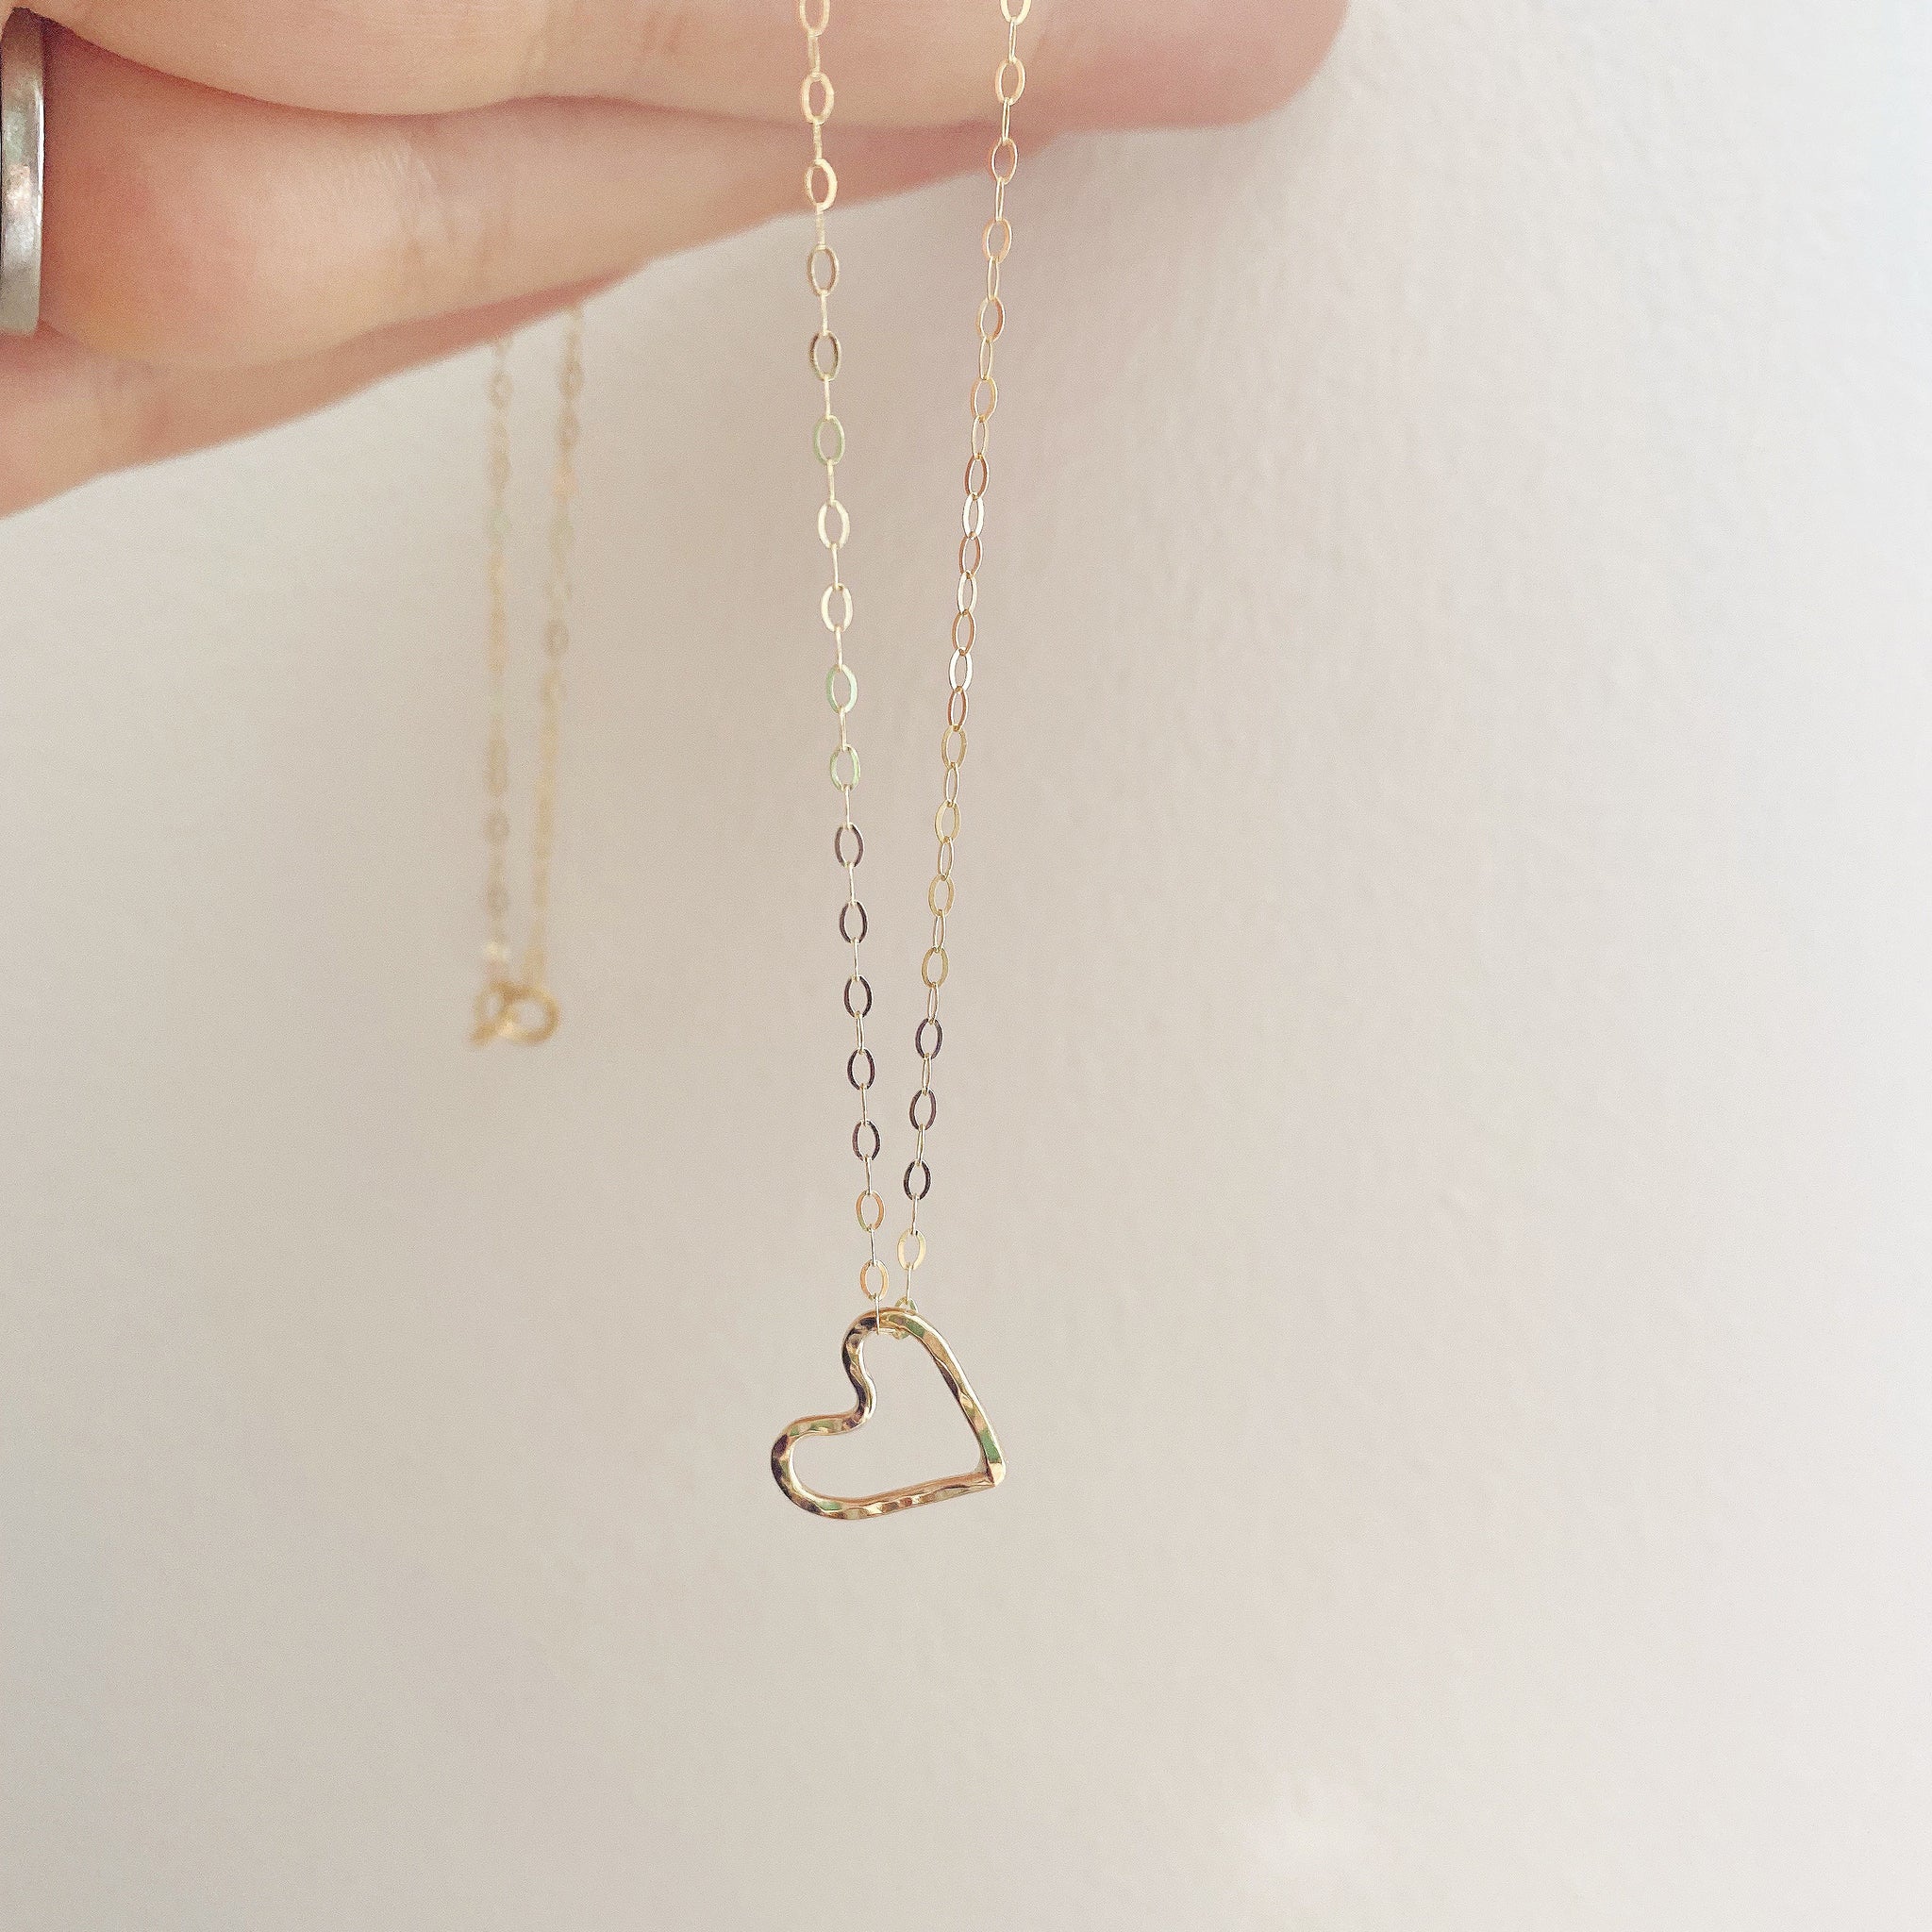 Hammered heart necklace in 9ct gold